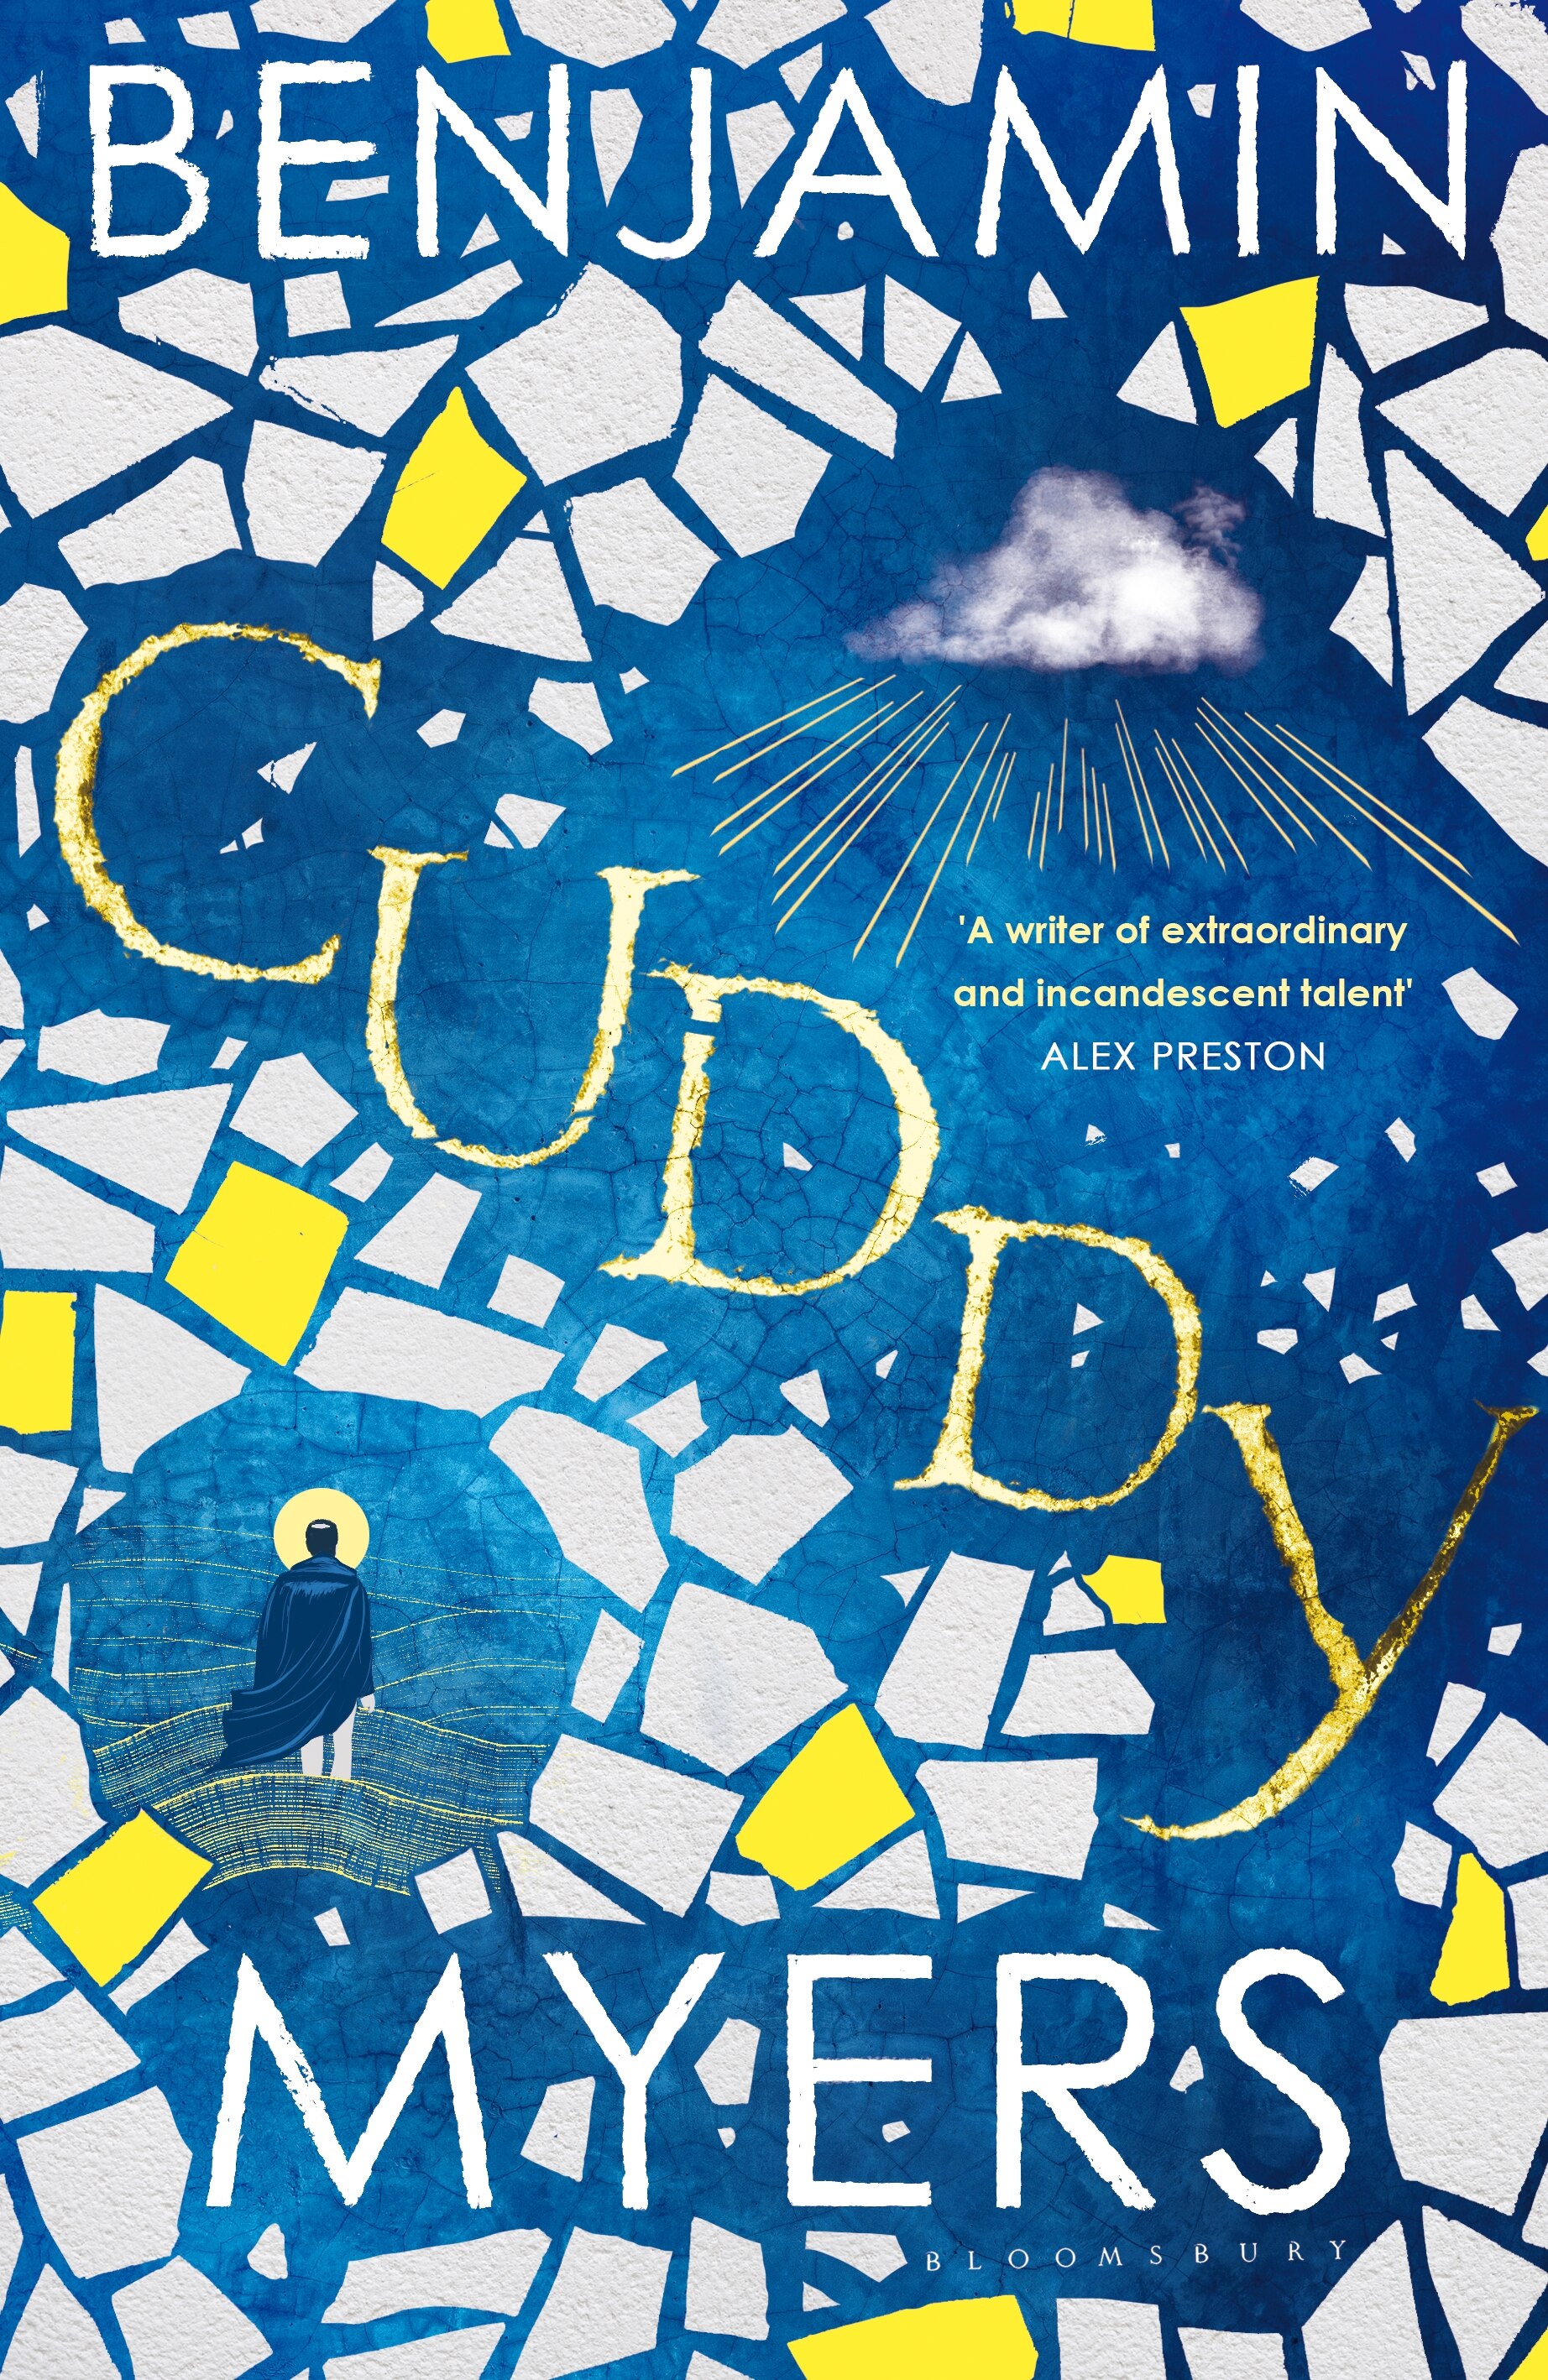 A book cover showing a mosaic-style illustration on a blue background; a cloud is top right and a person with a halo bottom left